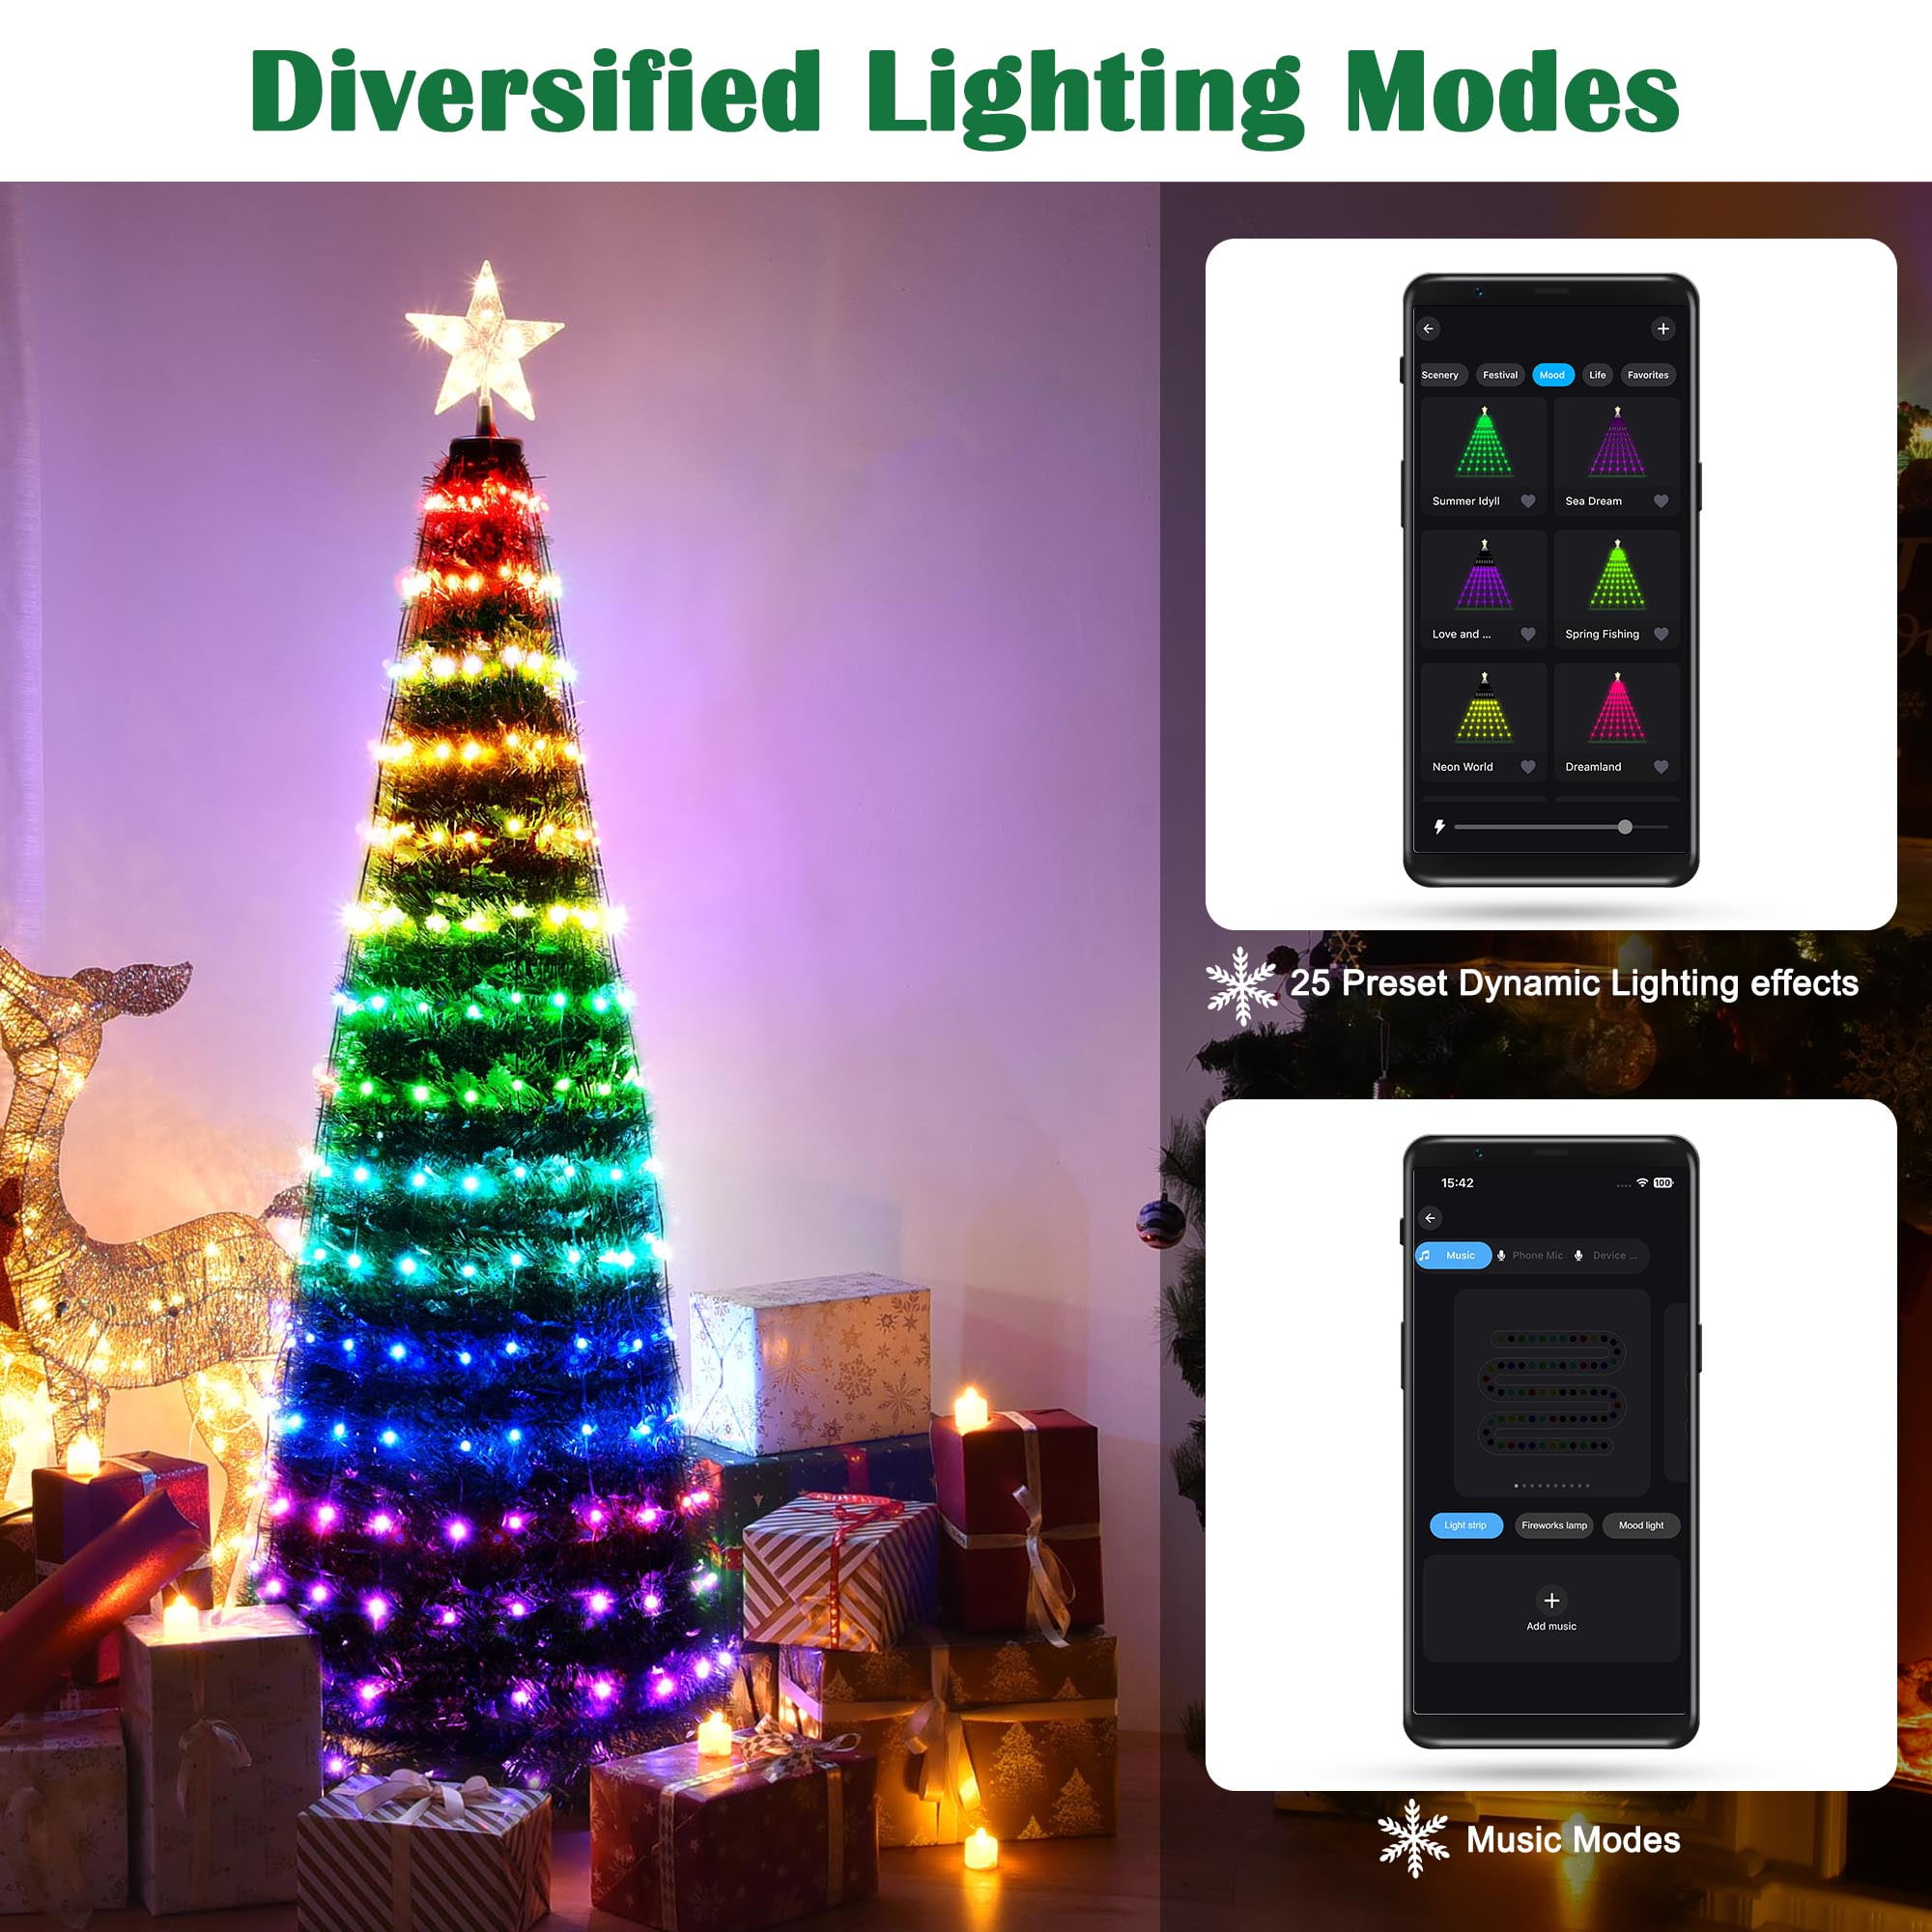 Wireless Remote Switch for Christmas Tree and Decorative, Christmas Gift  for Kids, $38.99 FREE FOR  USA REVIEWERS, DM ME IF YOU ARE  INTERESTED. : r/AMZreviewTrader